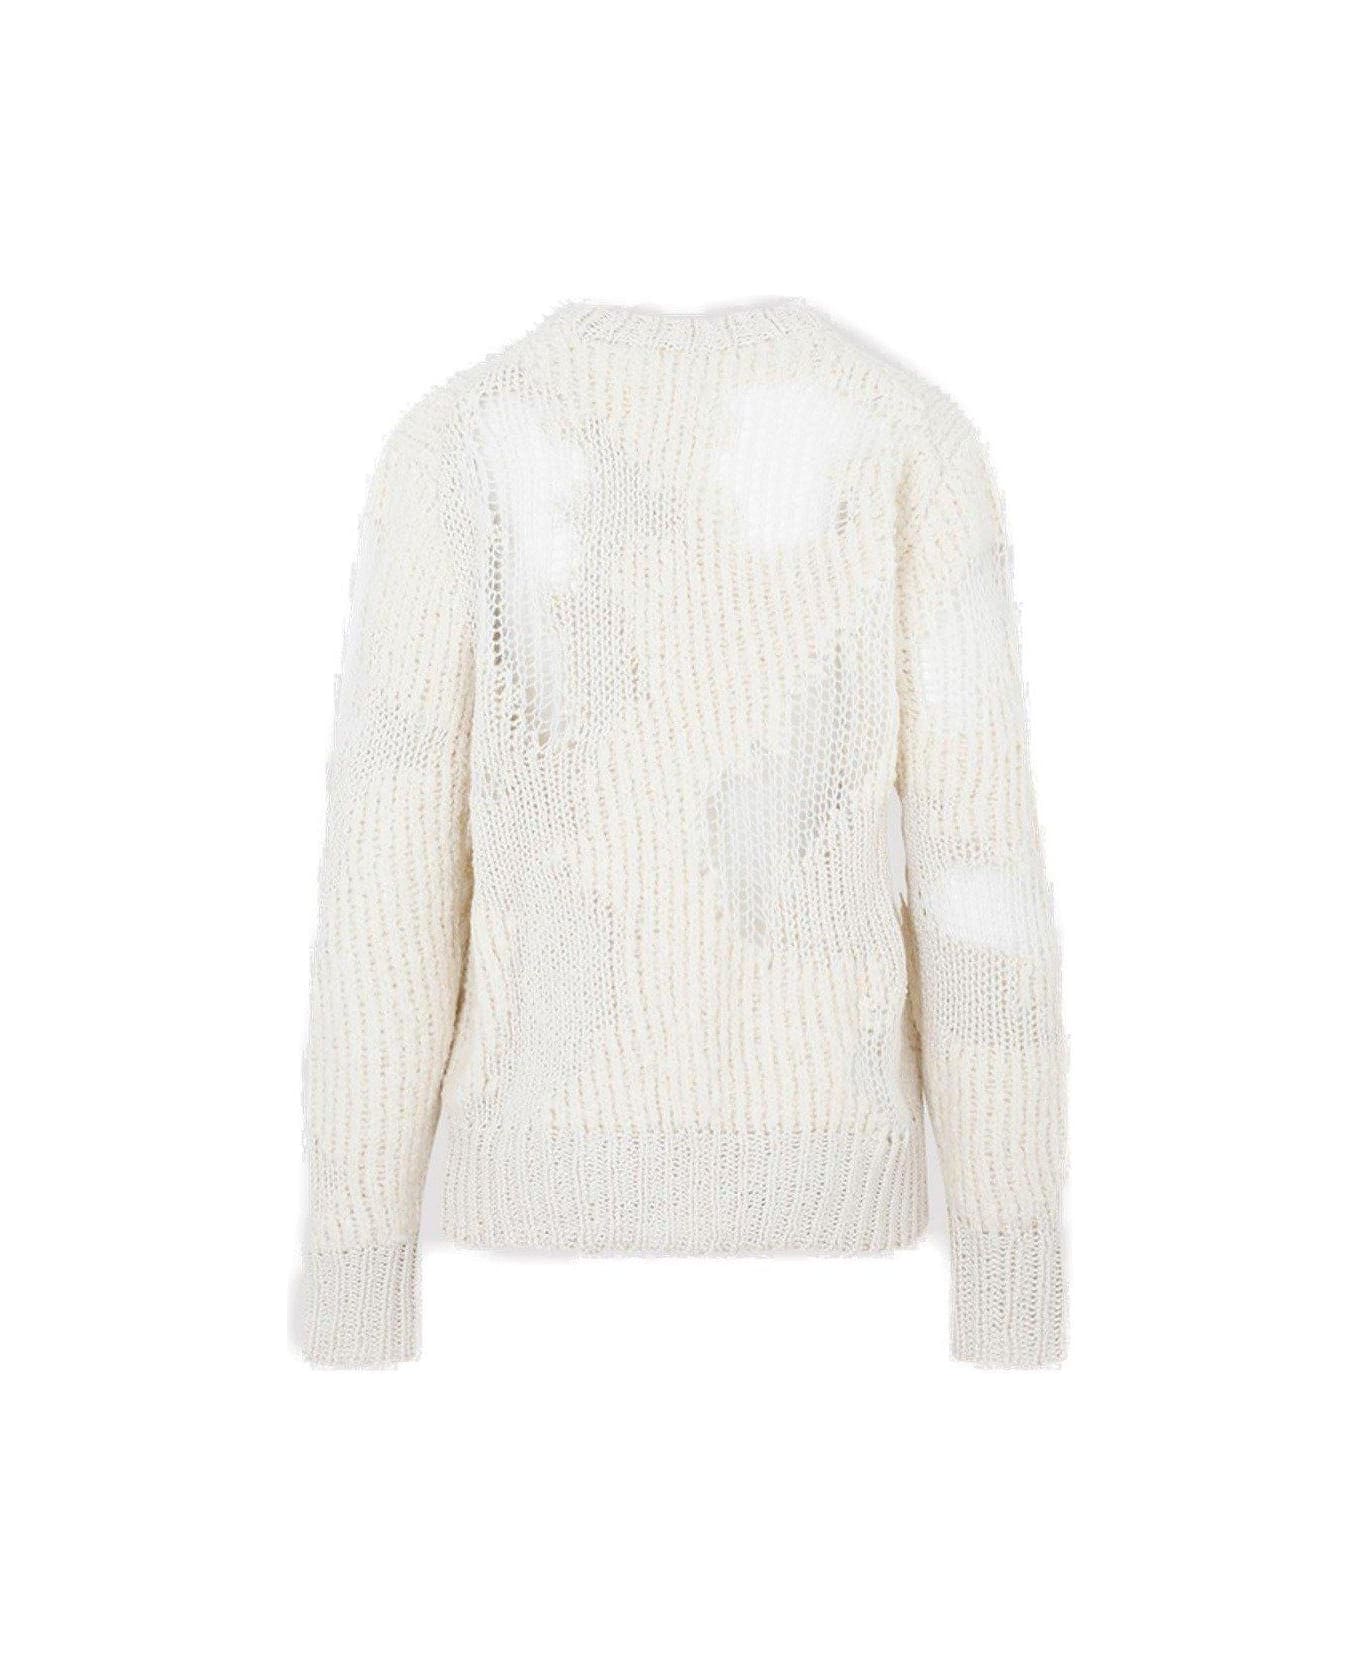 Chloé Sweater With Distinctive Knit